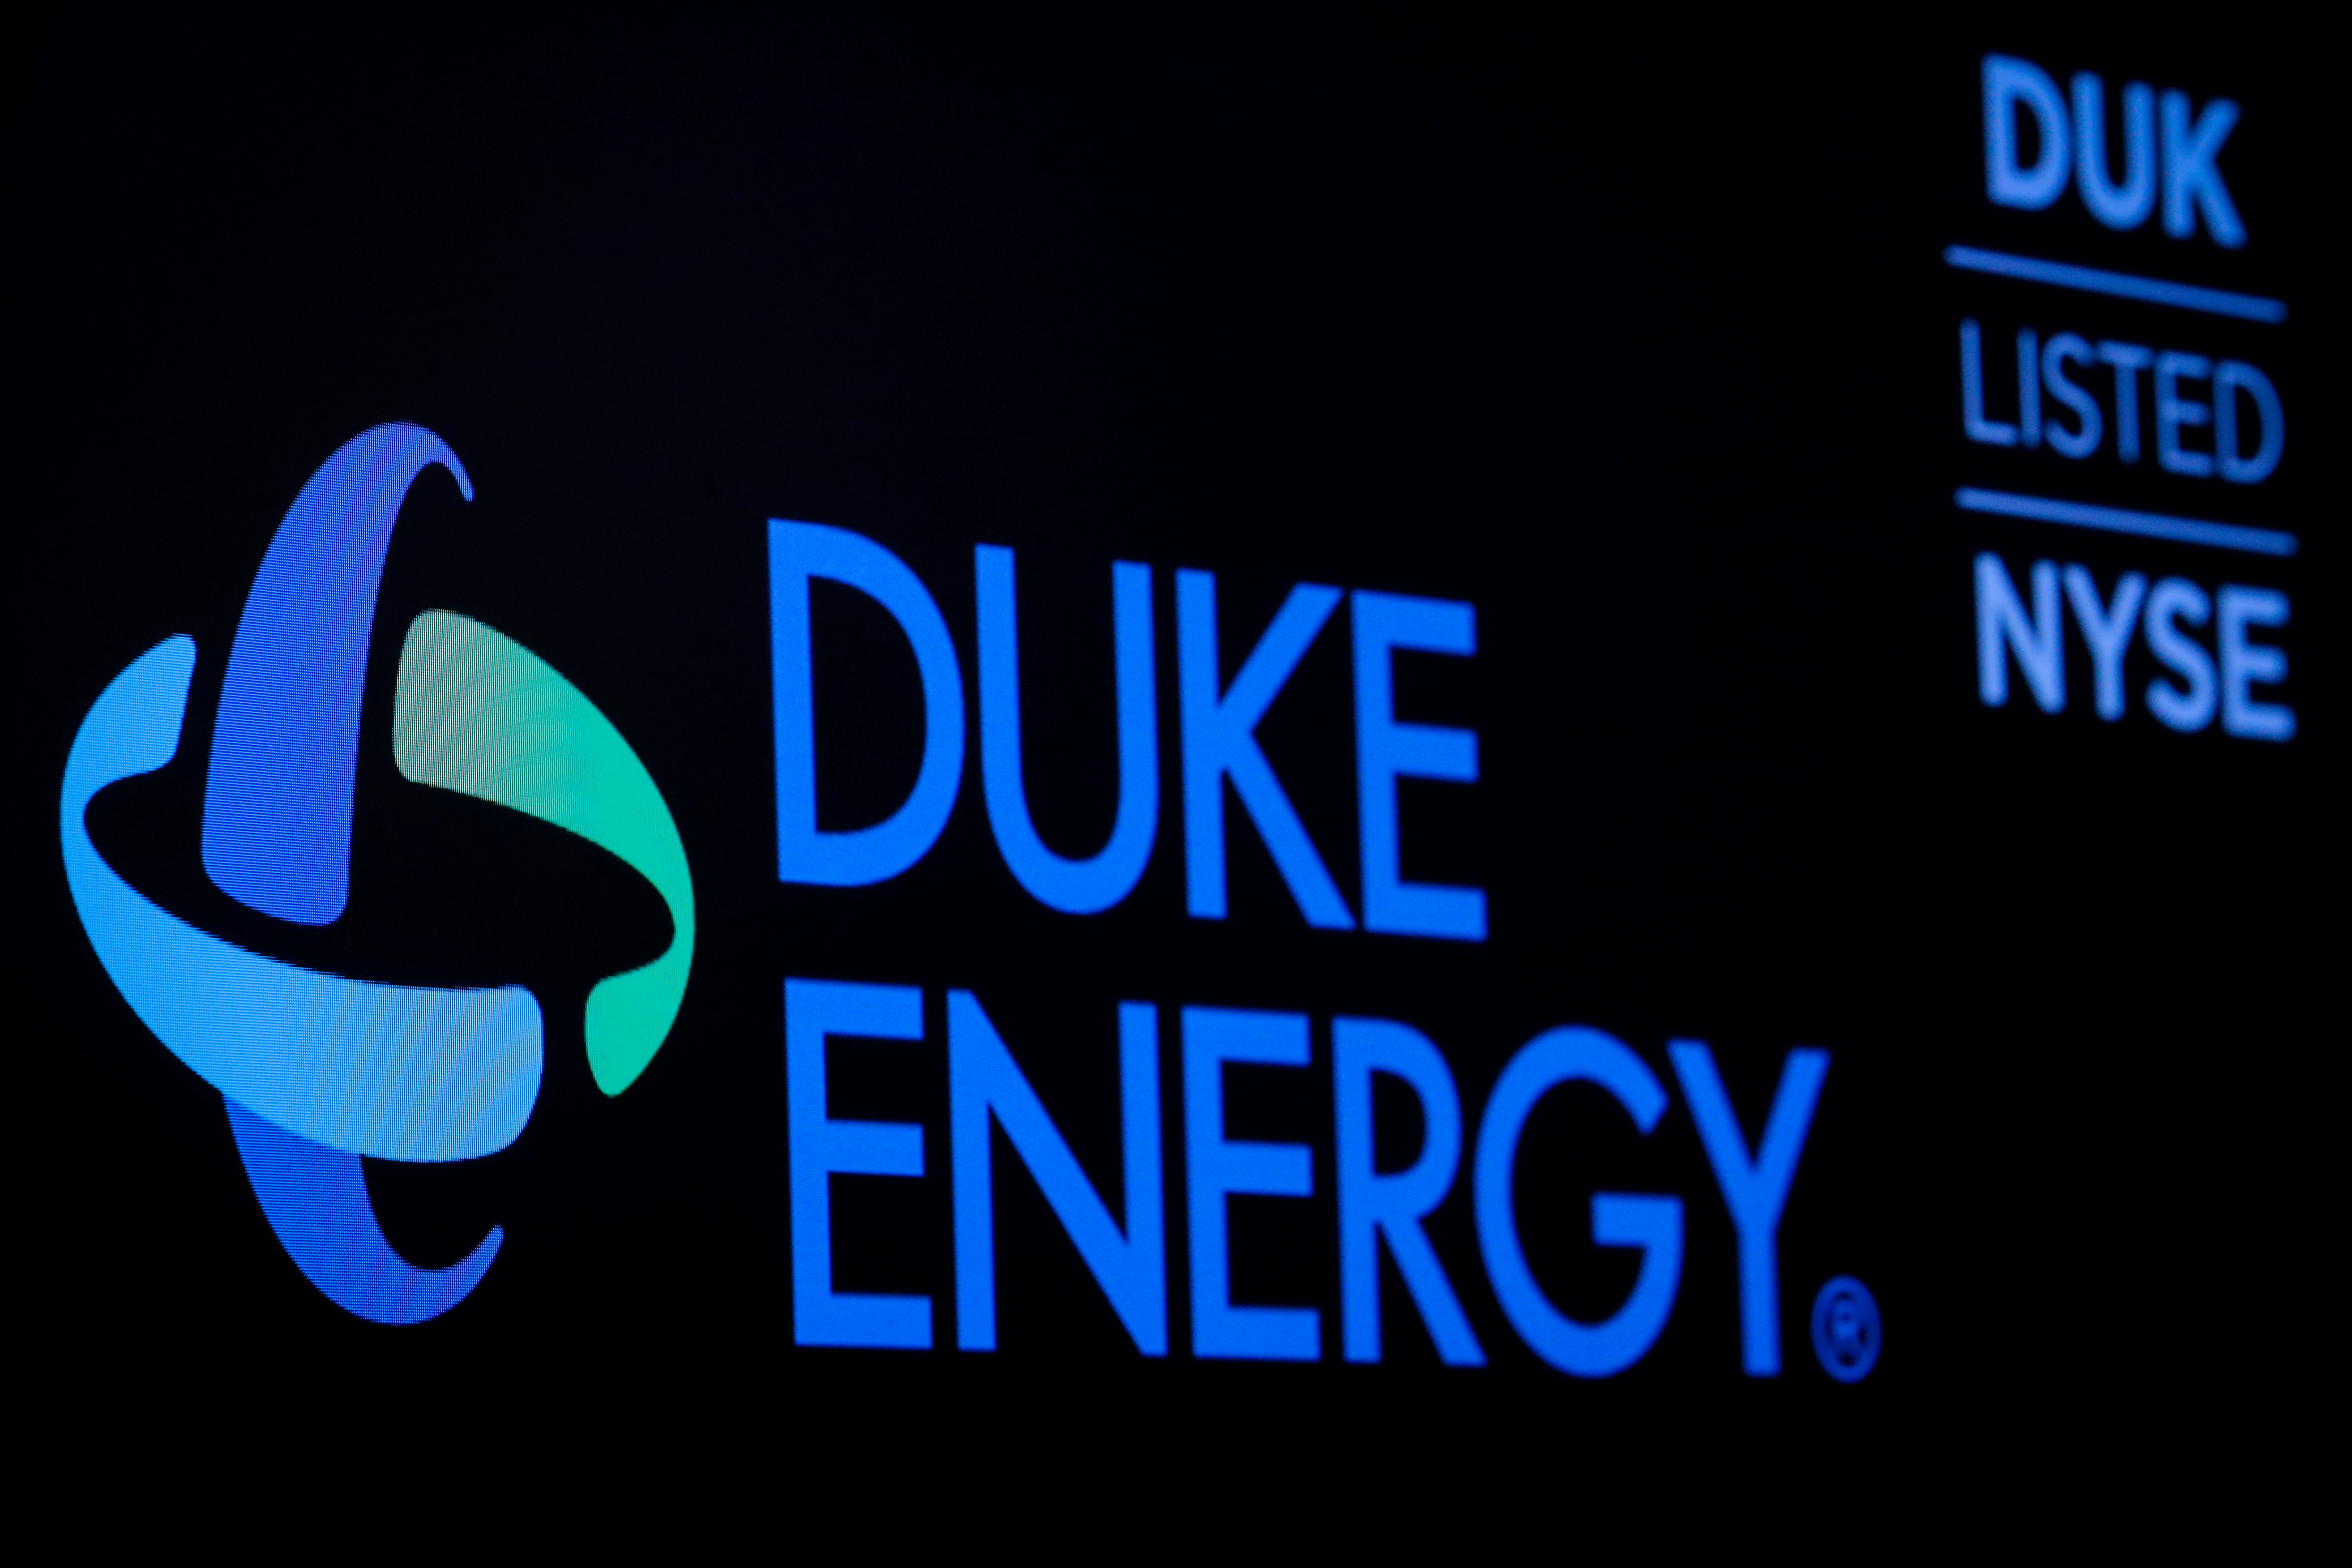 File photo: The company logo and ticker for Duke Energy Corp. is displayed on a screen on the floor of the New York Stock Exchange (NYSE) in New York, U.S., March 4, 2019. REUTERS/Brendan McDermid